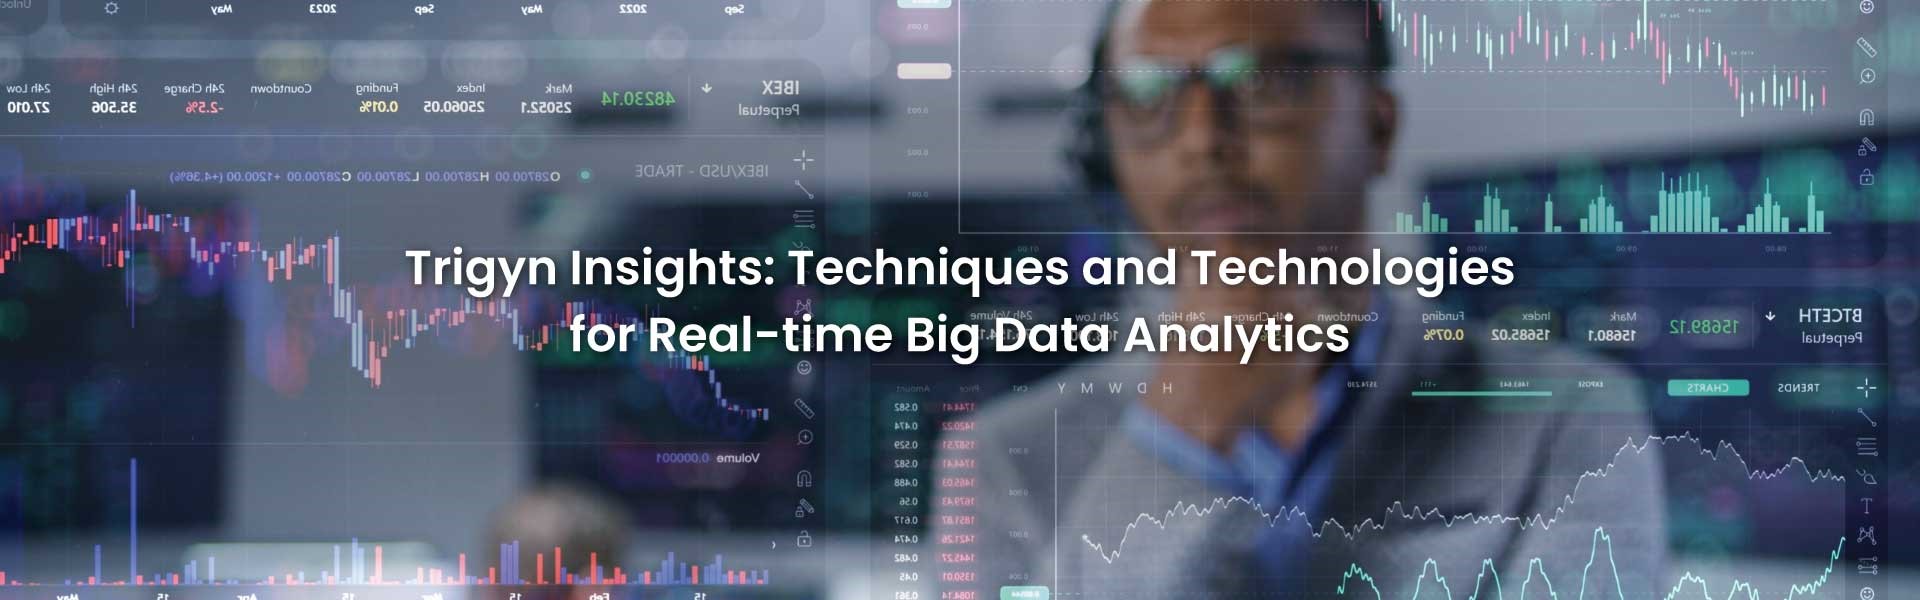 Technologies for Real-time Big Data Analytics